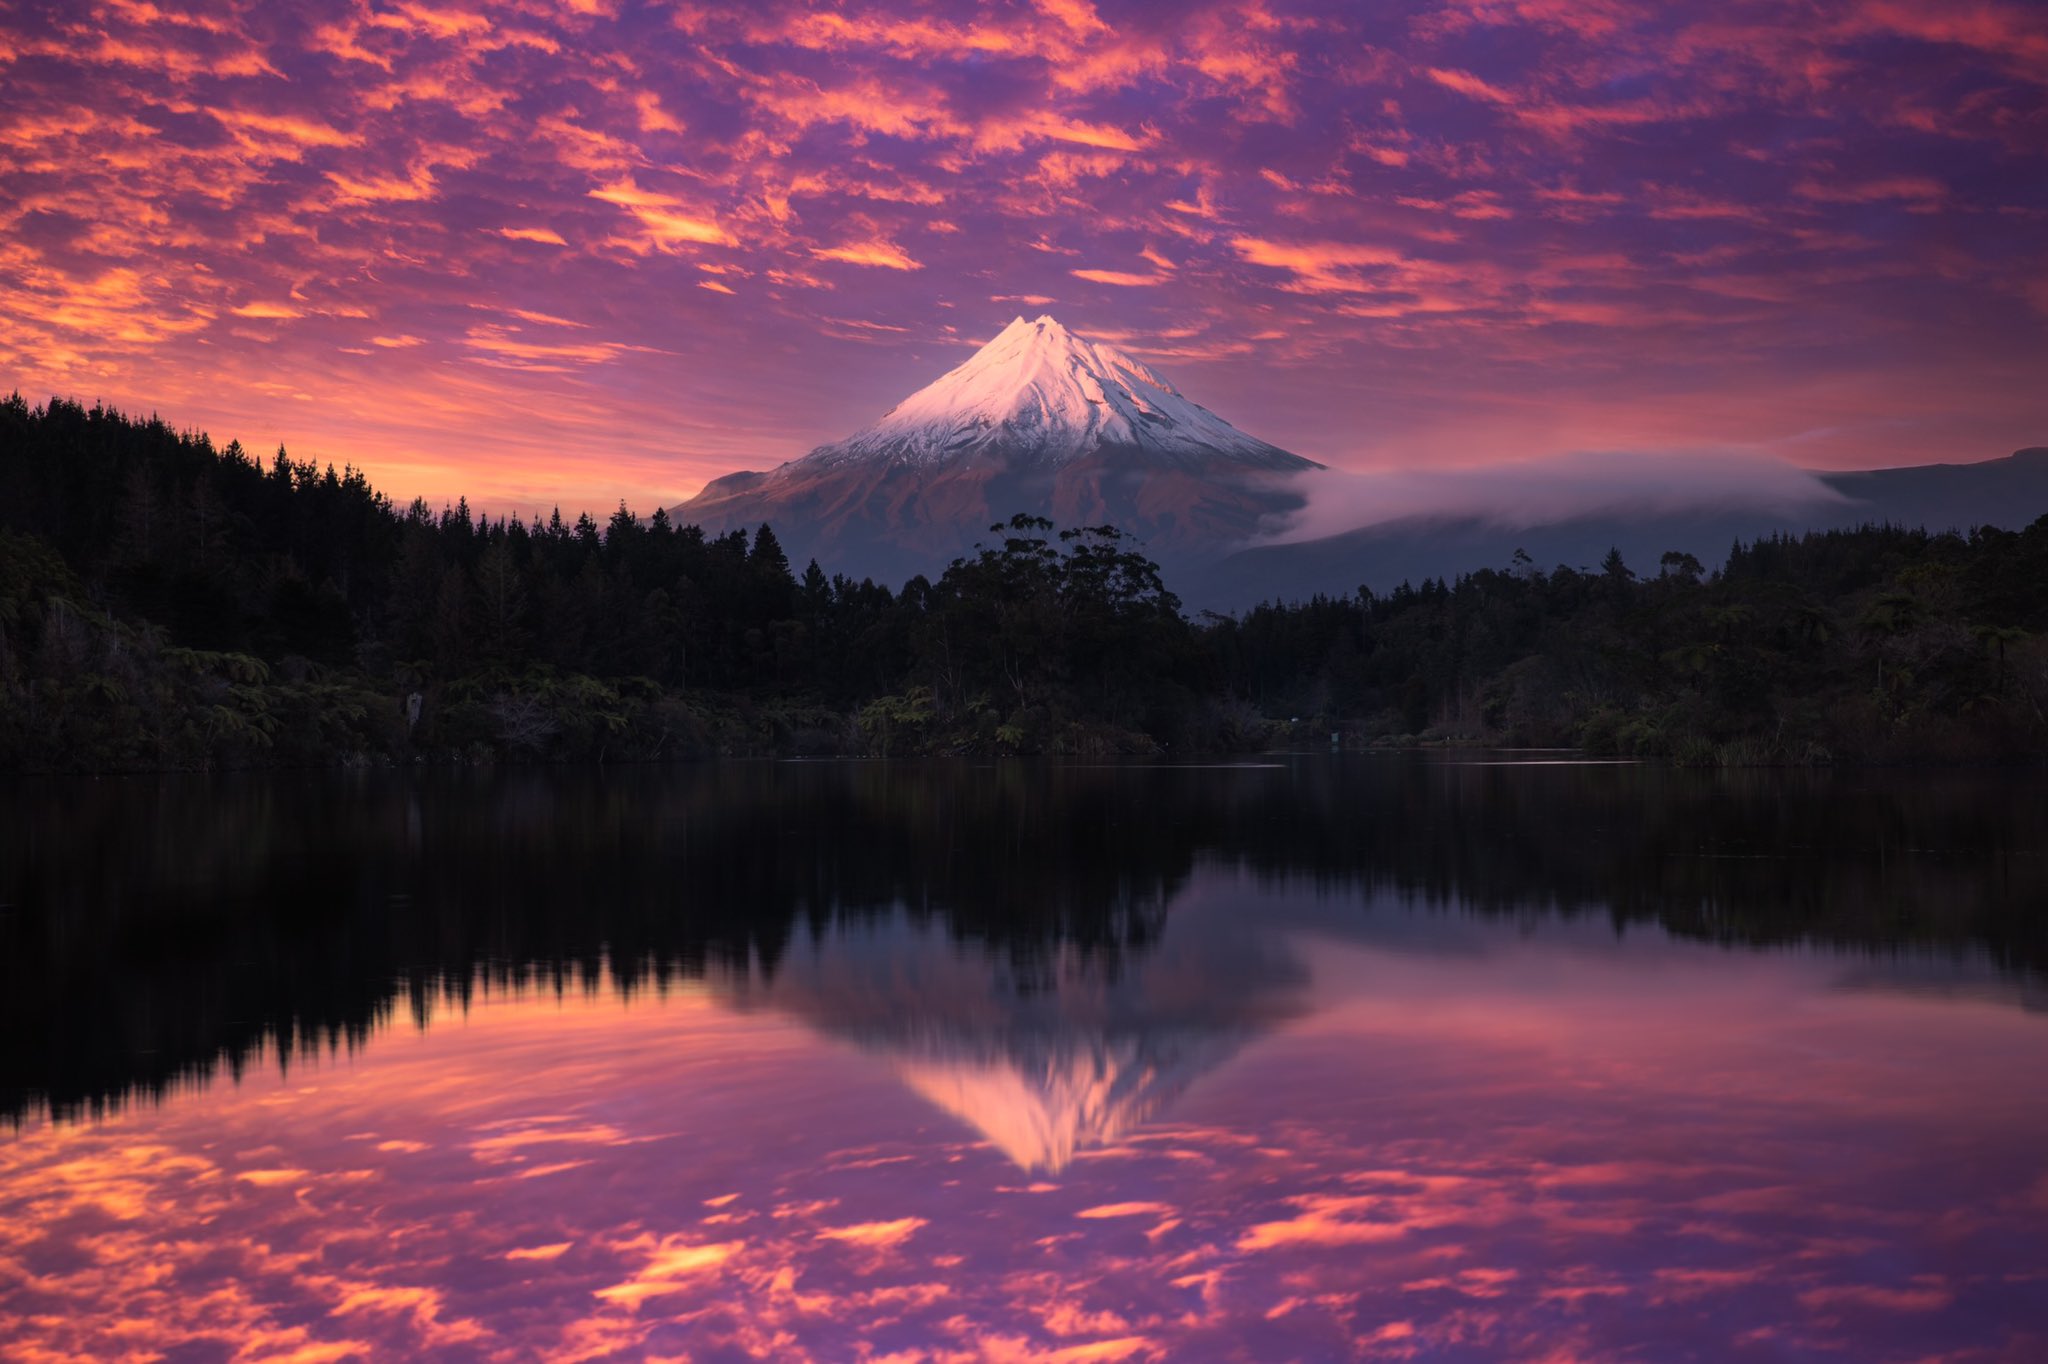 General 2048x1364 Rach Stewart nature mountains lake reflection forest trees sky clouds purple low light